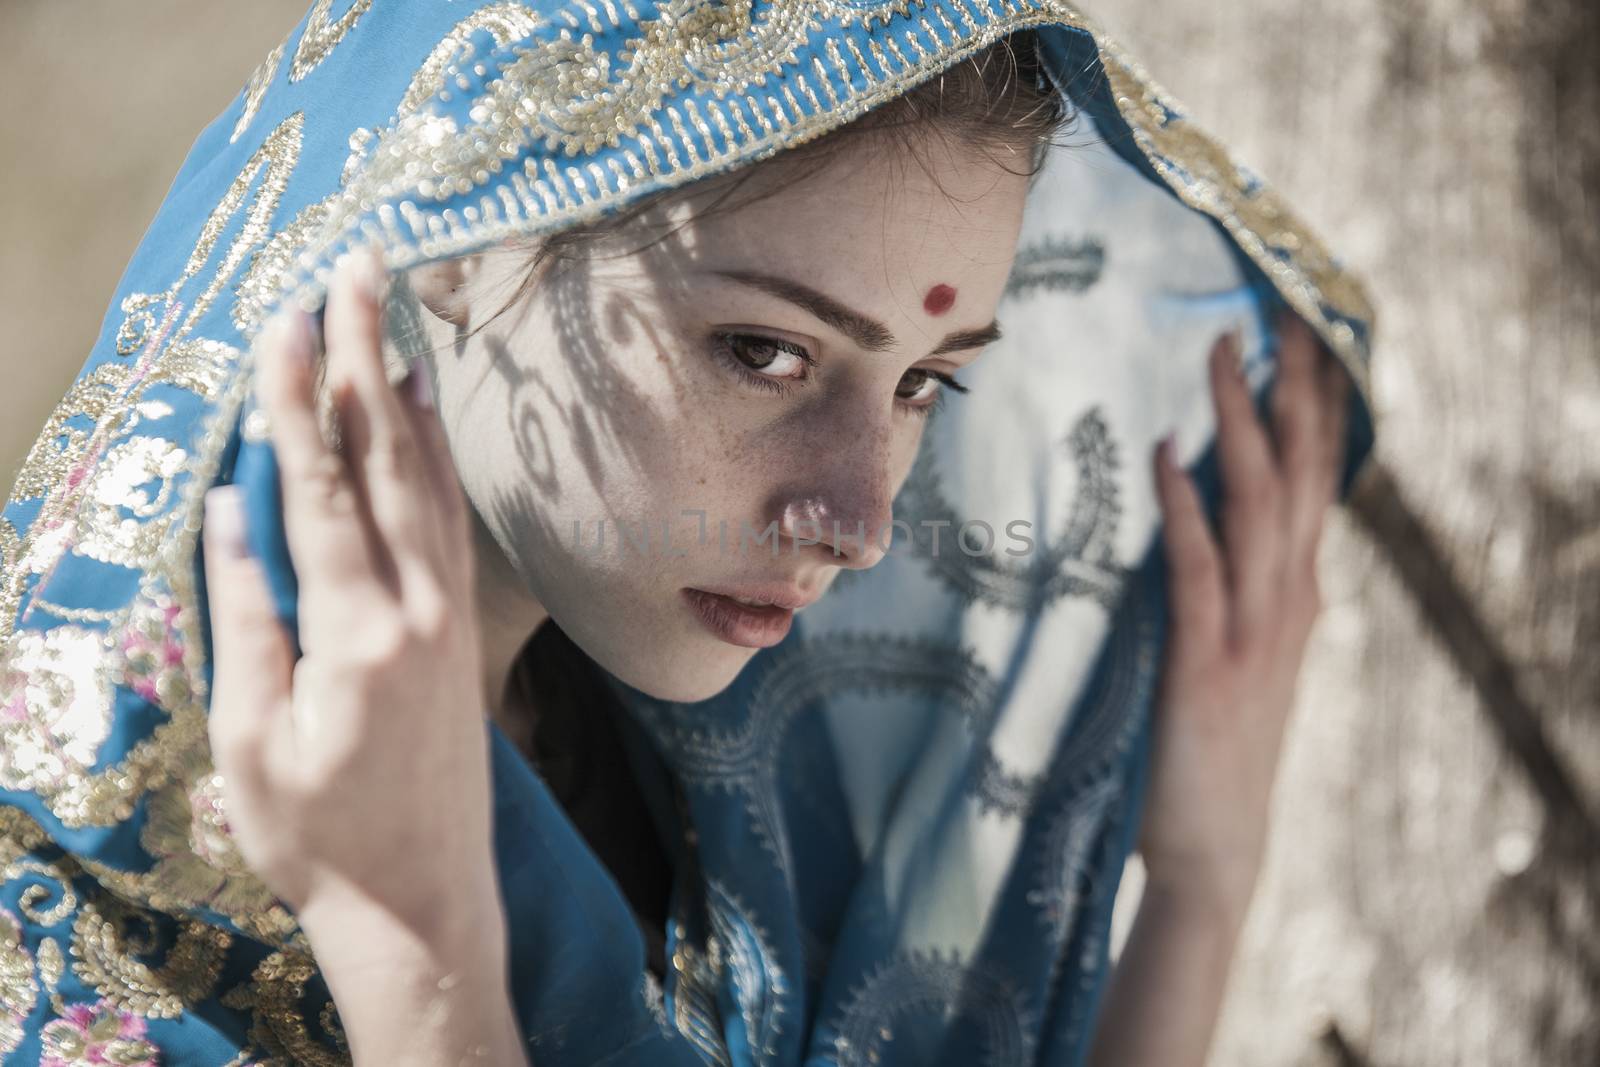 The girl the European covered with a sari, a faces portrait